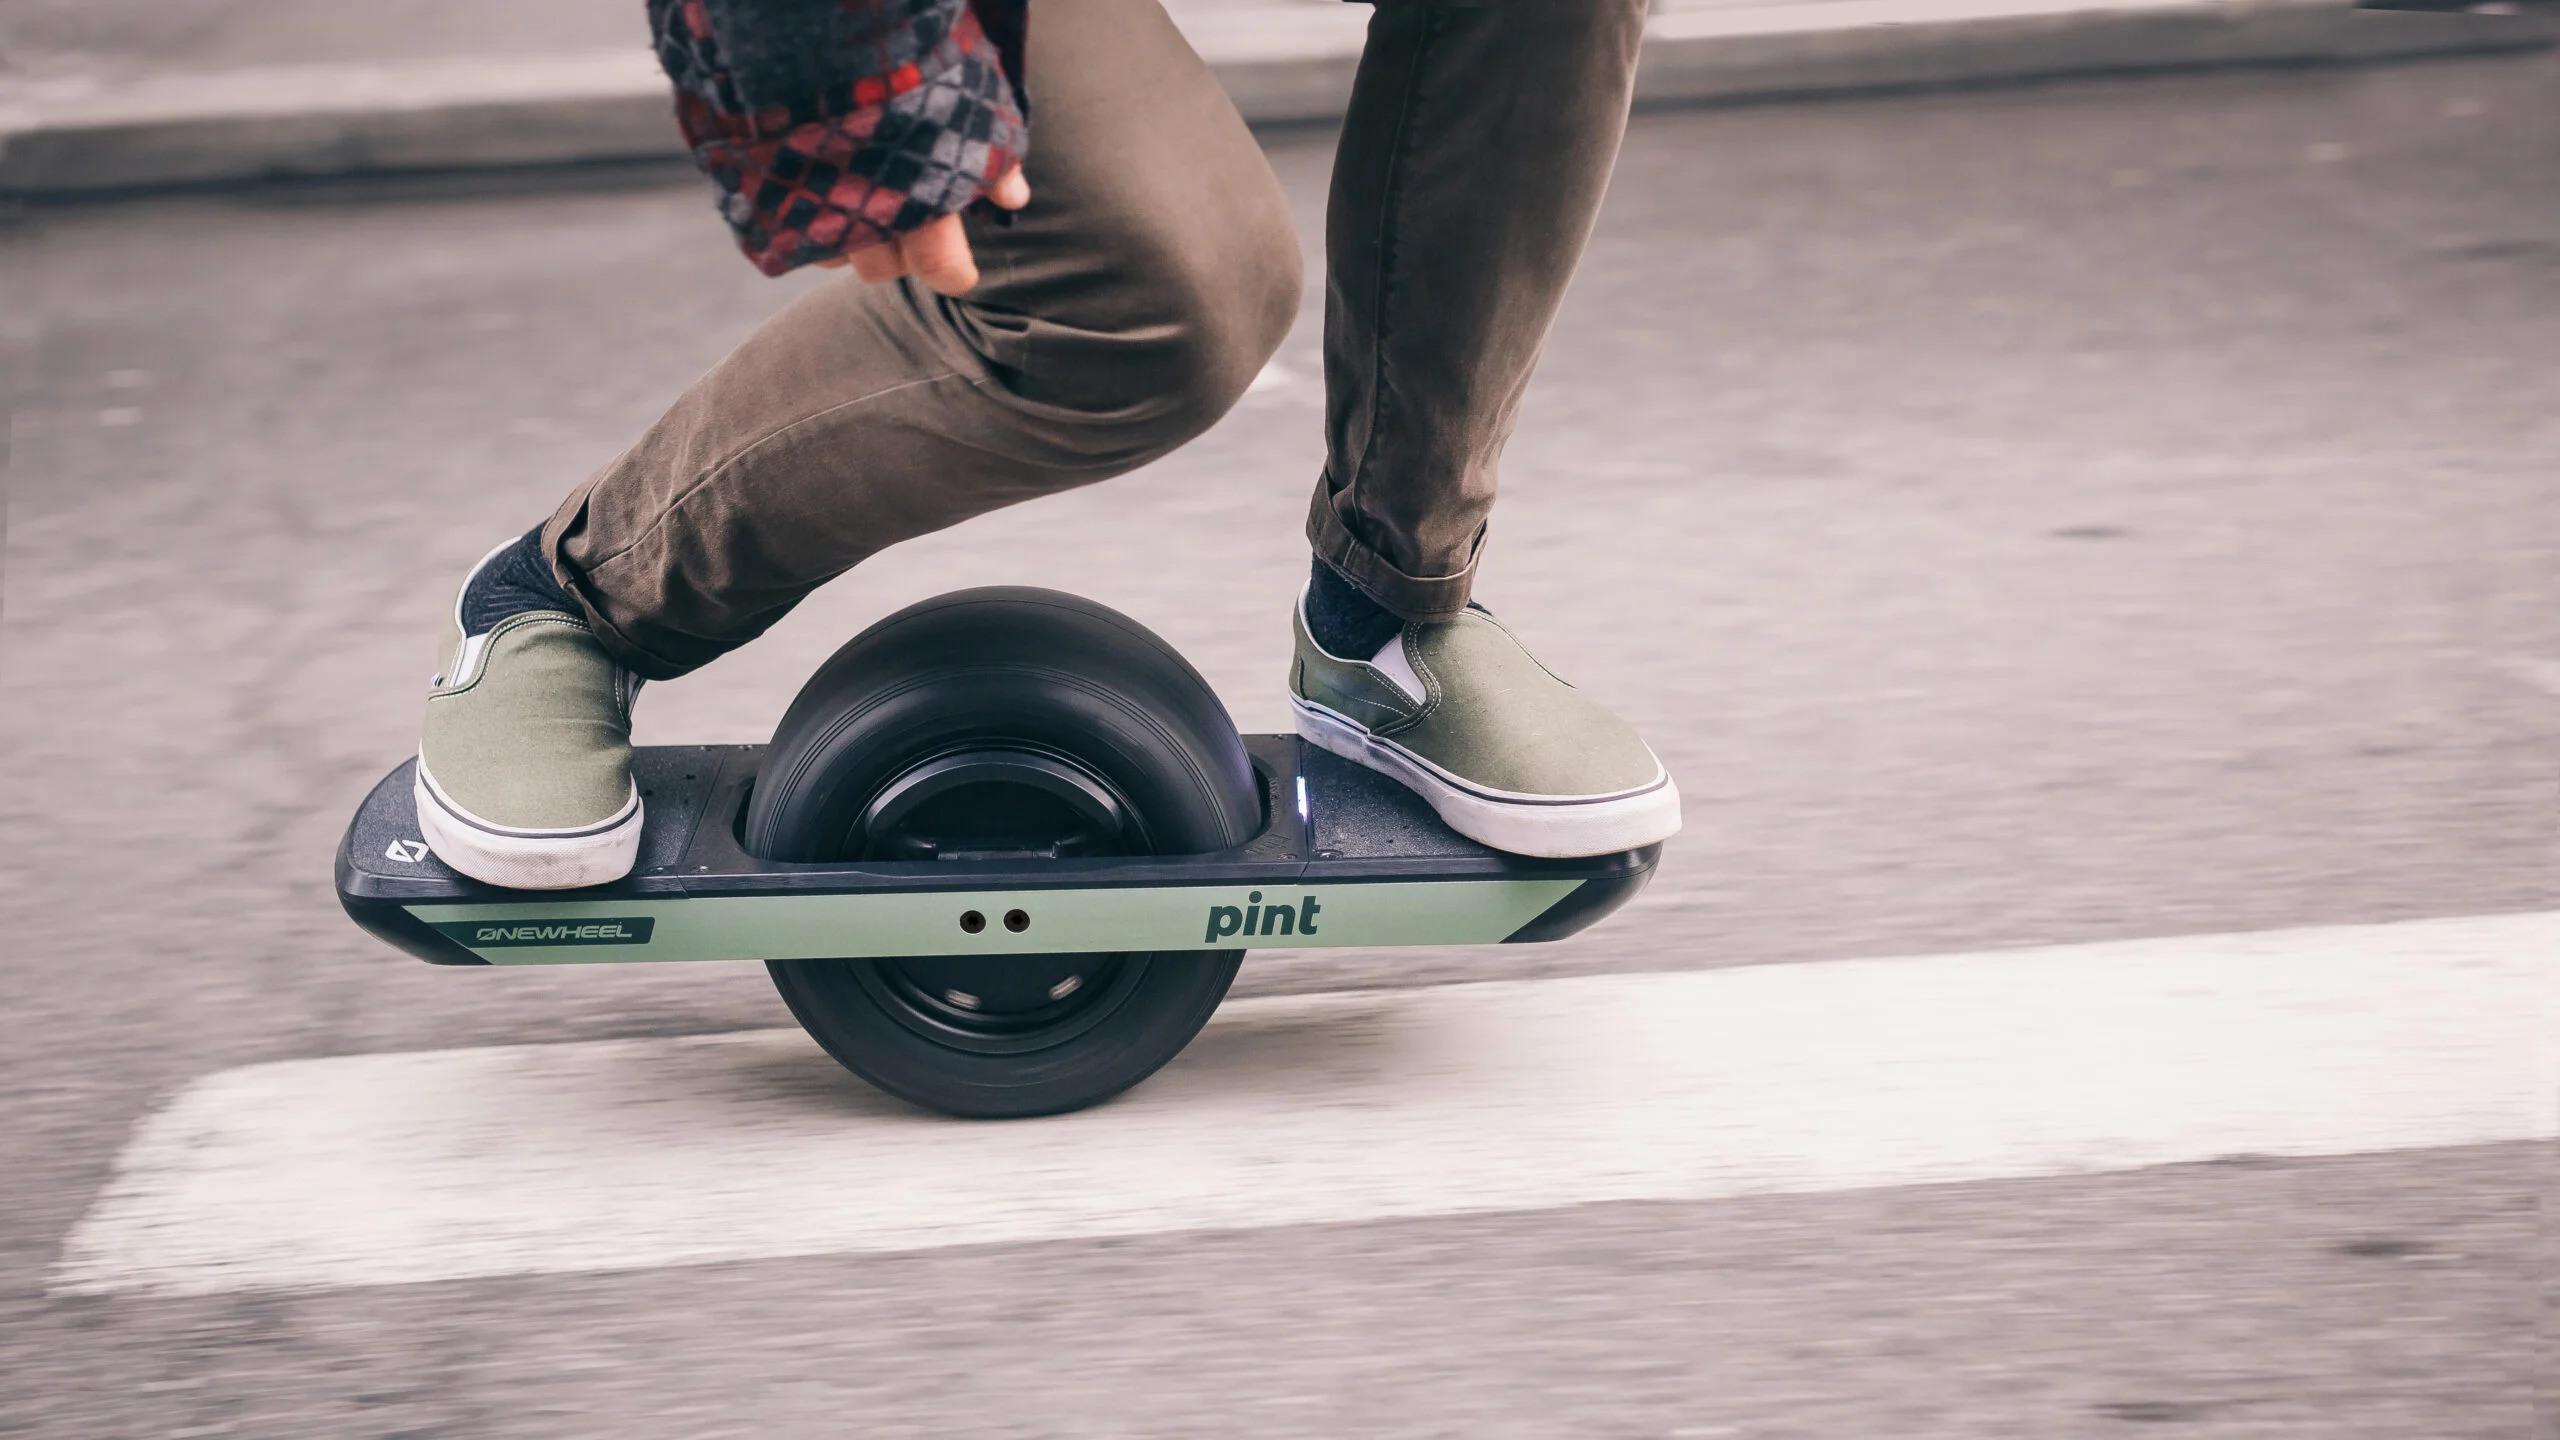 where-is-the-onewheel-electric-skateboard-located